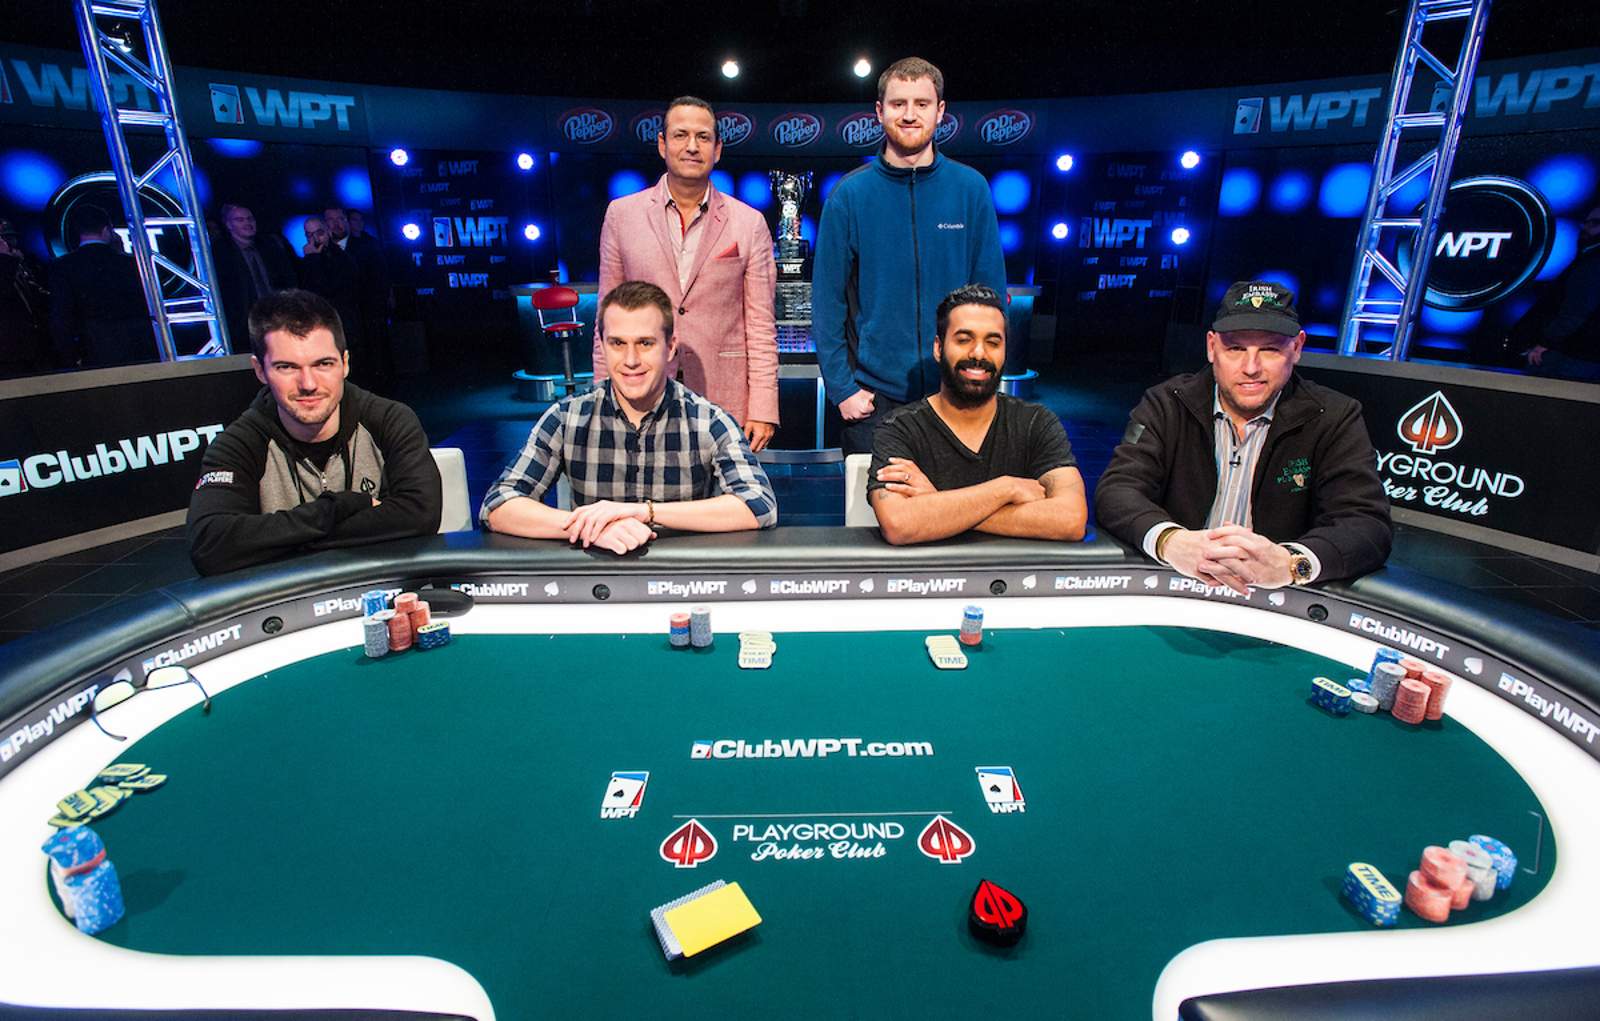 WPT Montreal Final Table Live on PokerGO